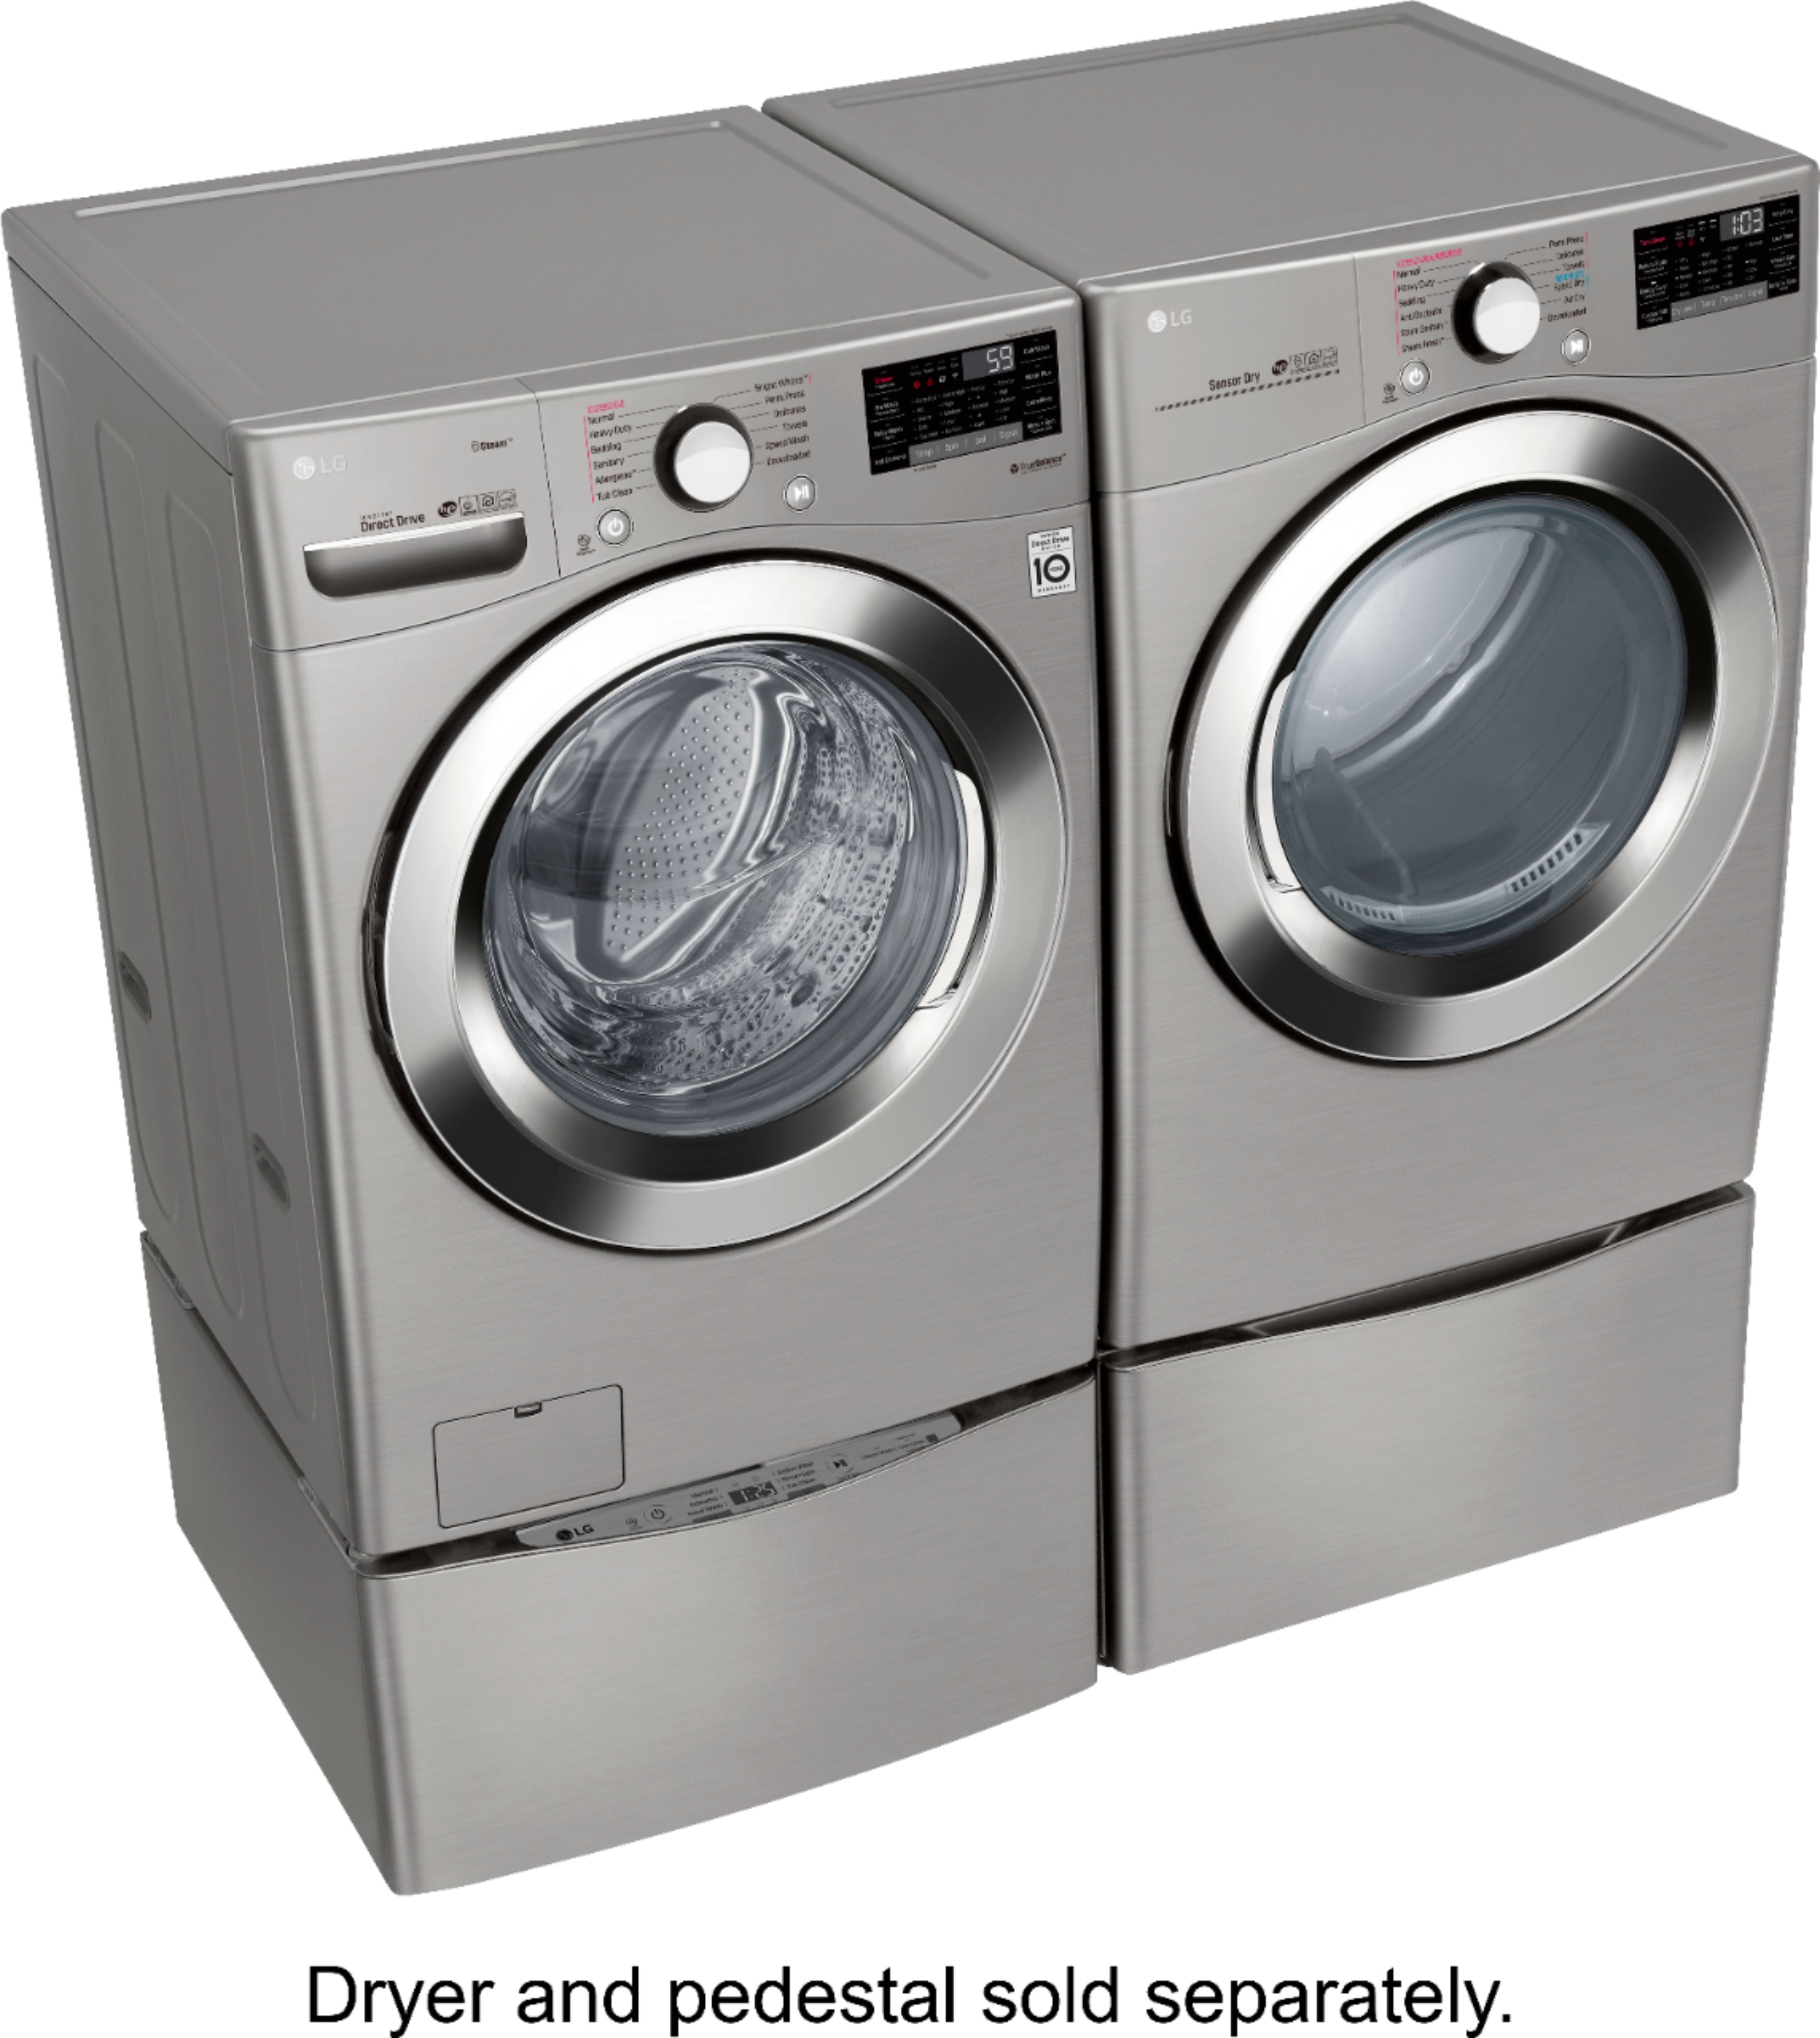 LG 4.5 Cu. Ft. Stackable SMART Front Load Washer in White with